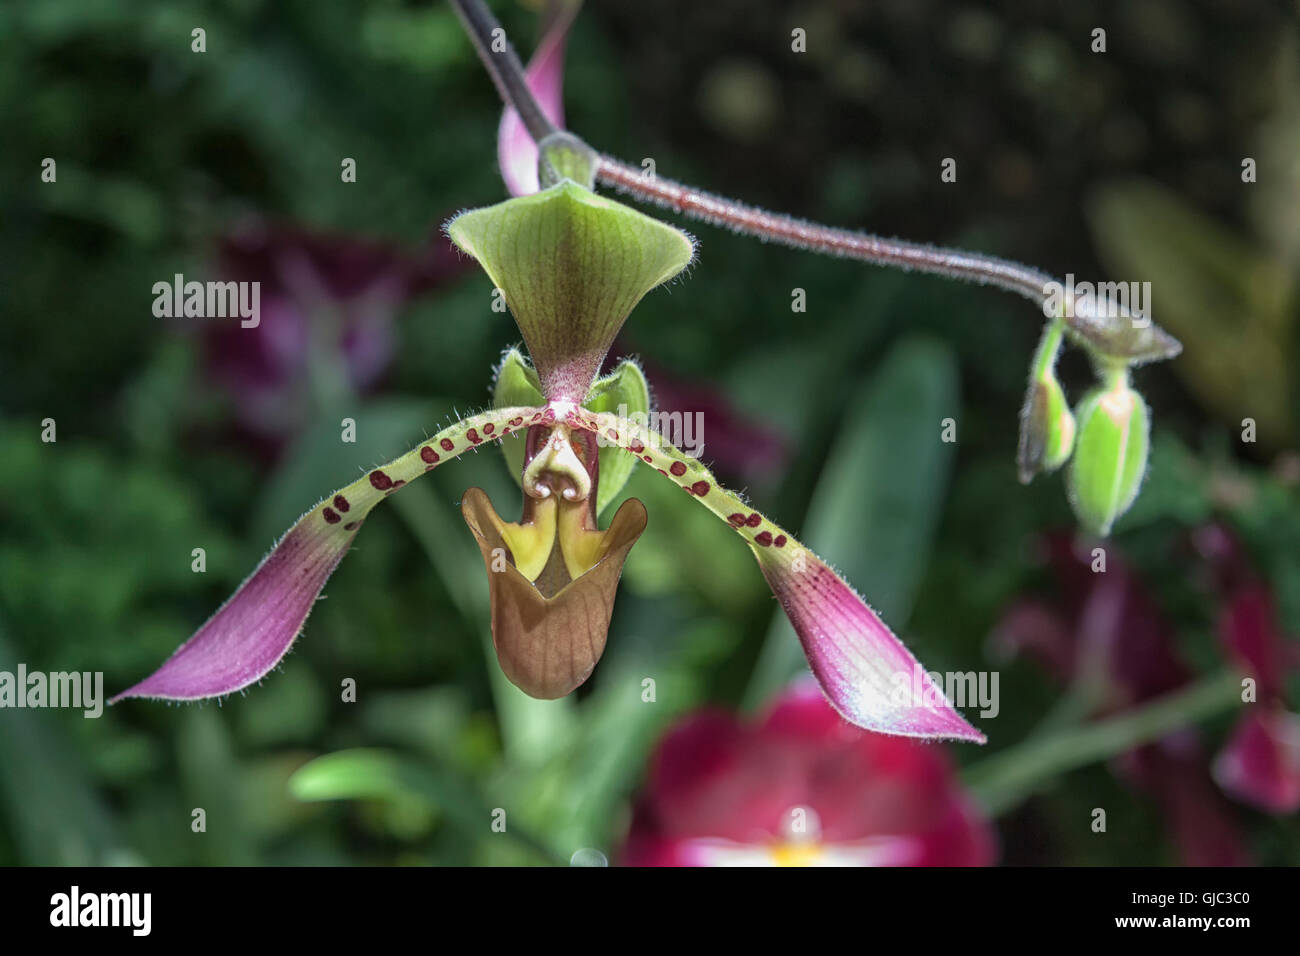 A closeup image of a pink Slipper Orchid (Paphiopedilum) flower. Stock Photo